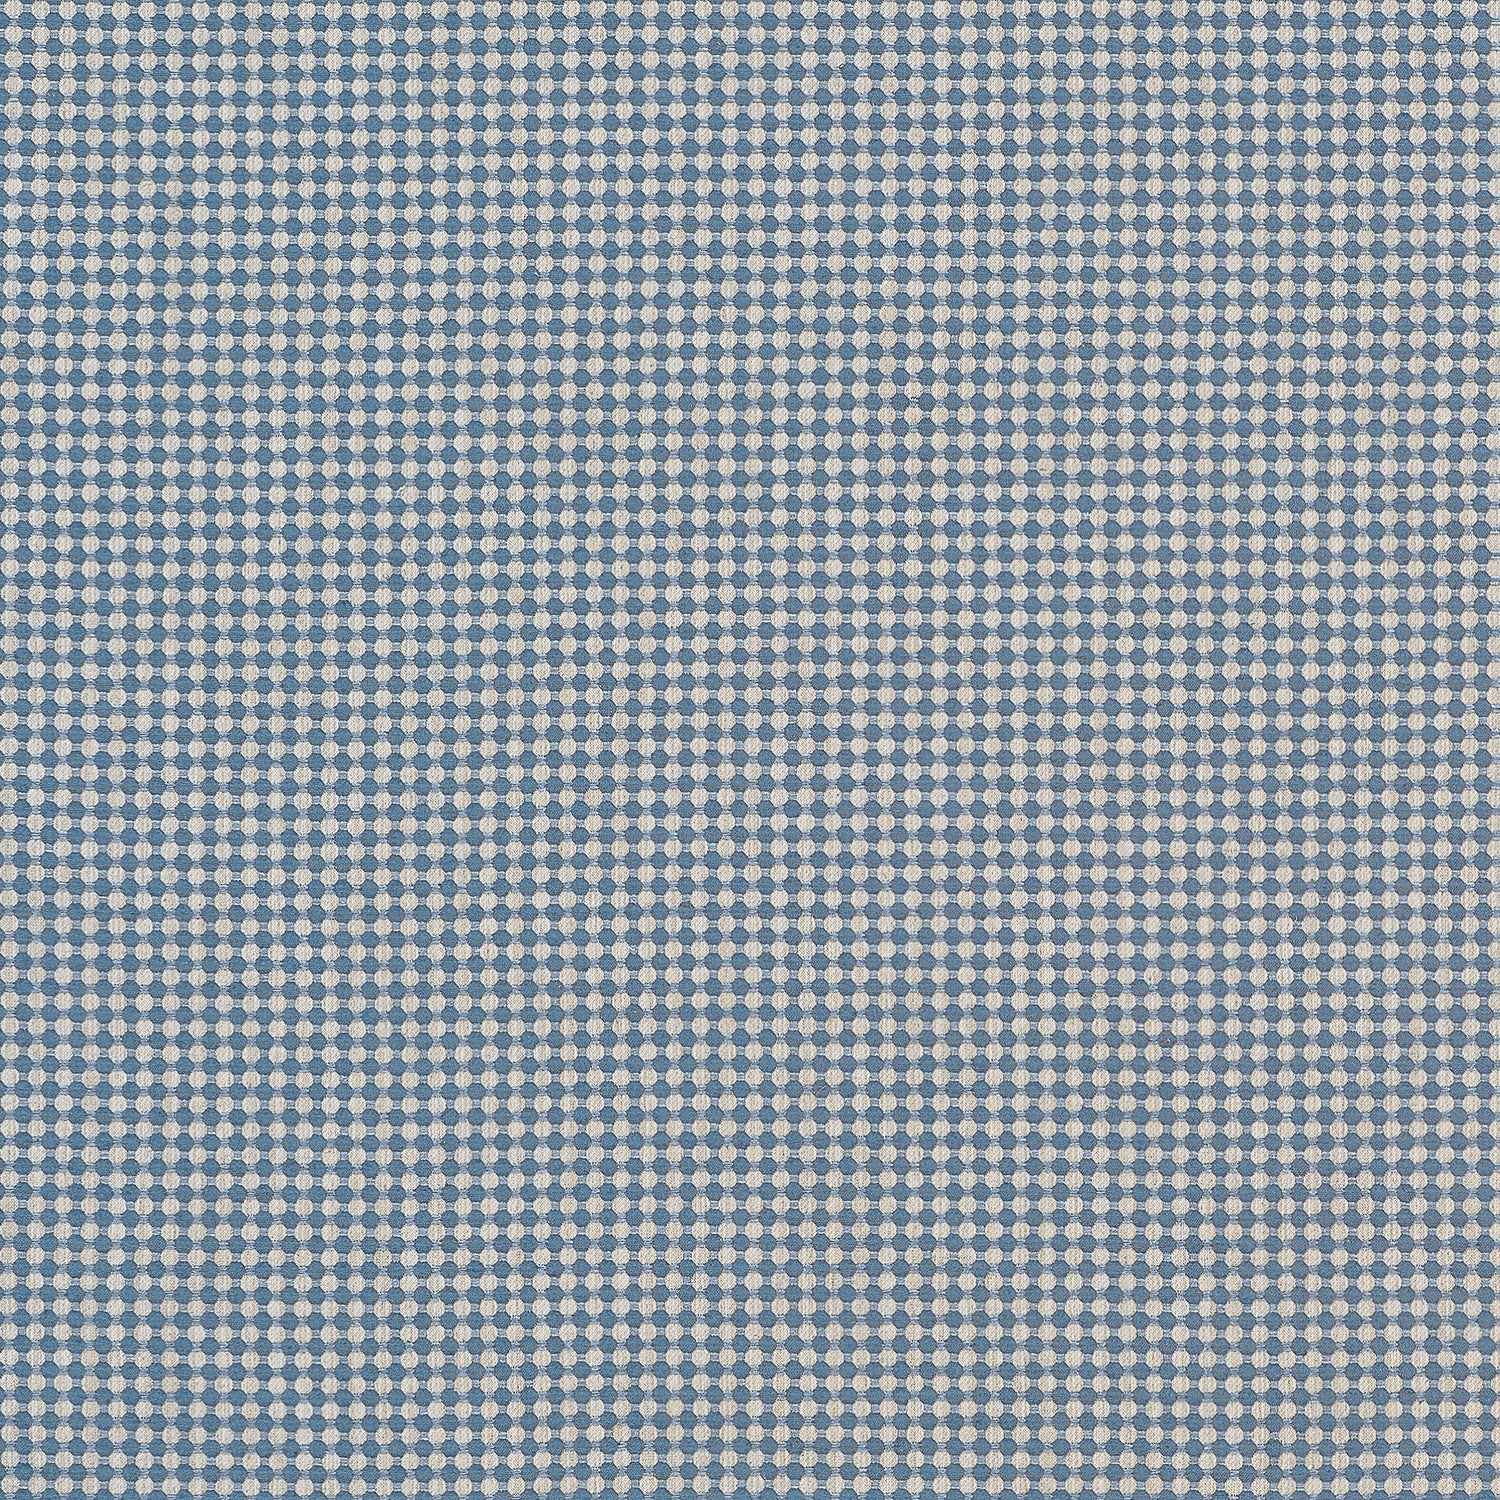 Darcy fabric in denim color - pattern number W81922 - by Thibaut in the Companions collection